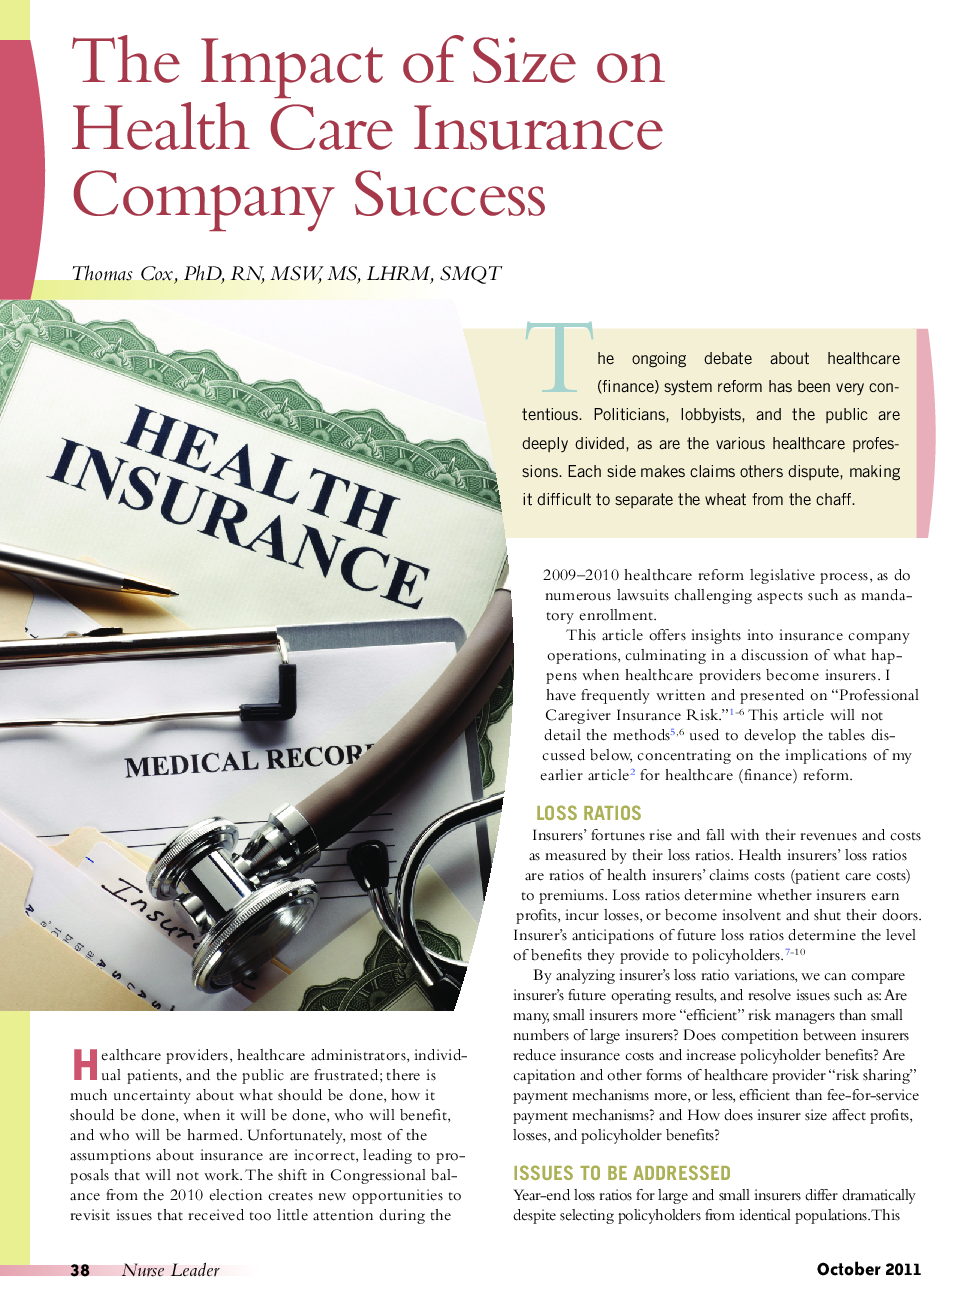 The Impact of Size on Health Care Insurance Company Success